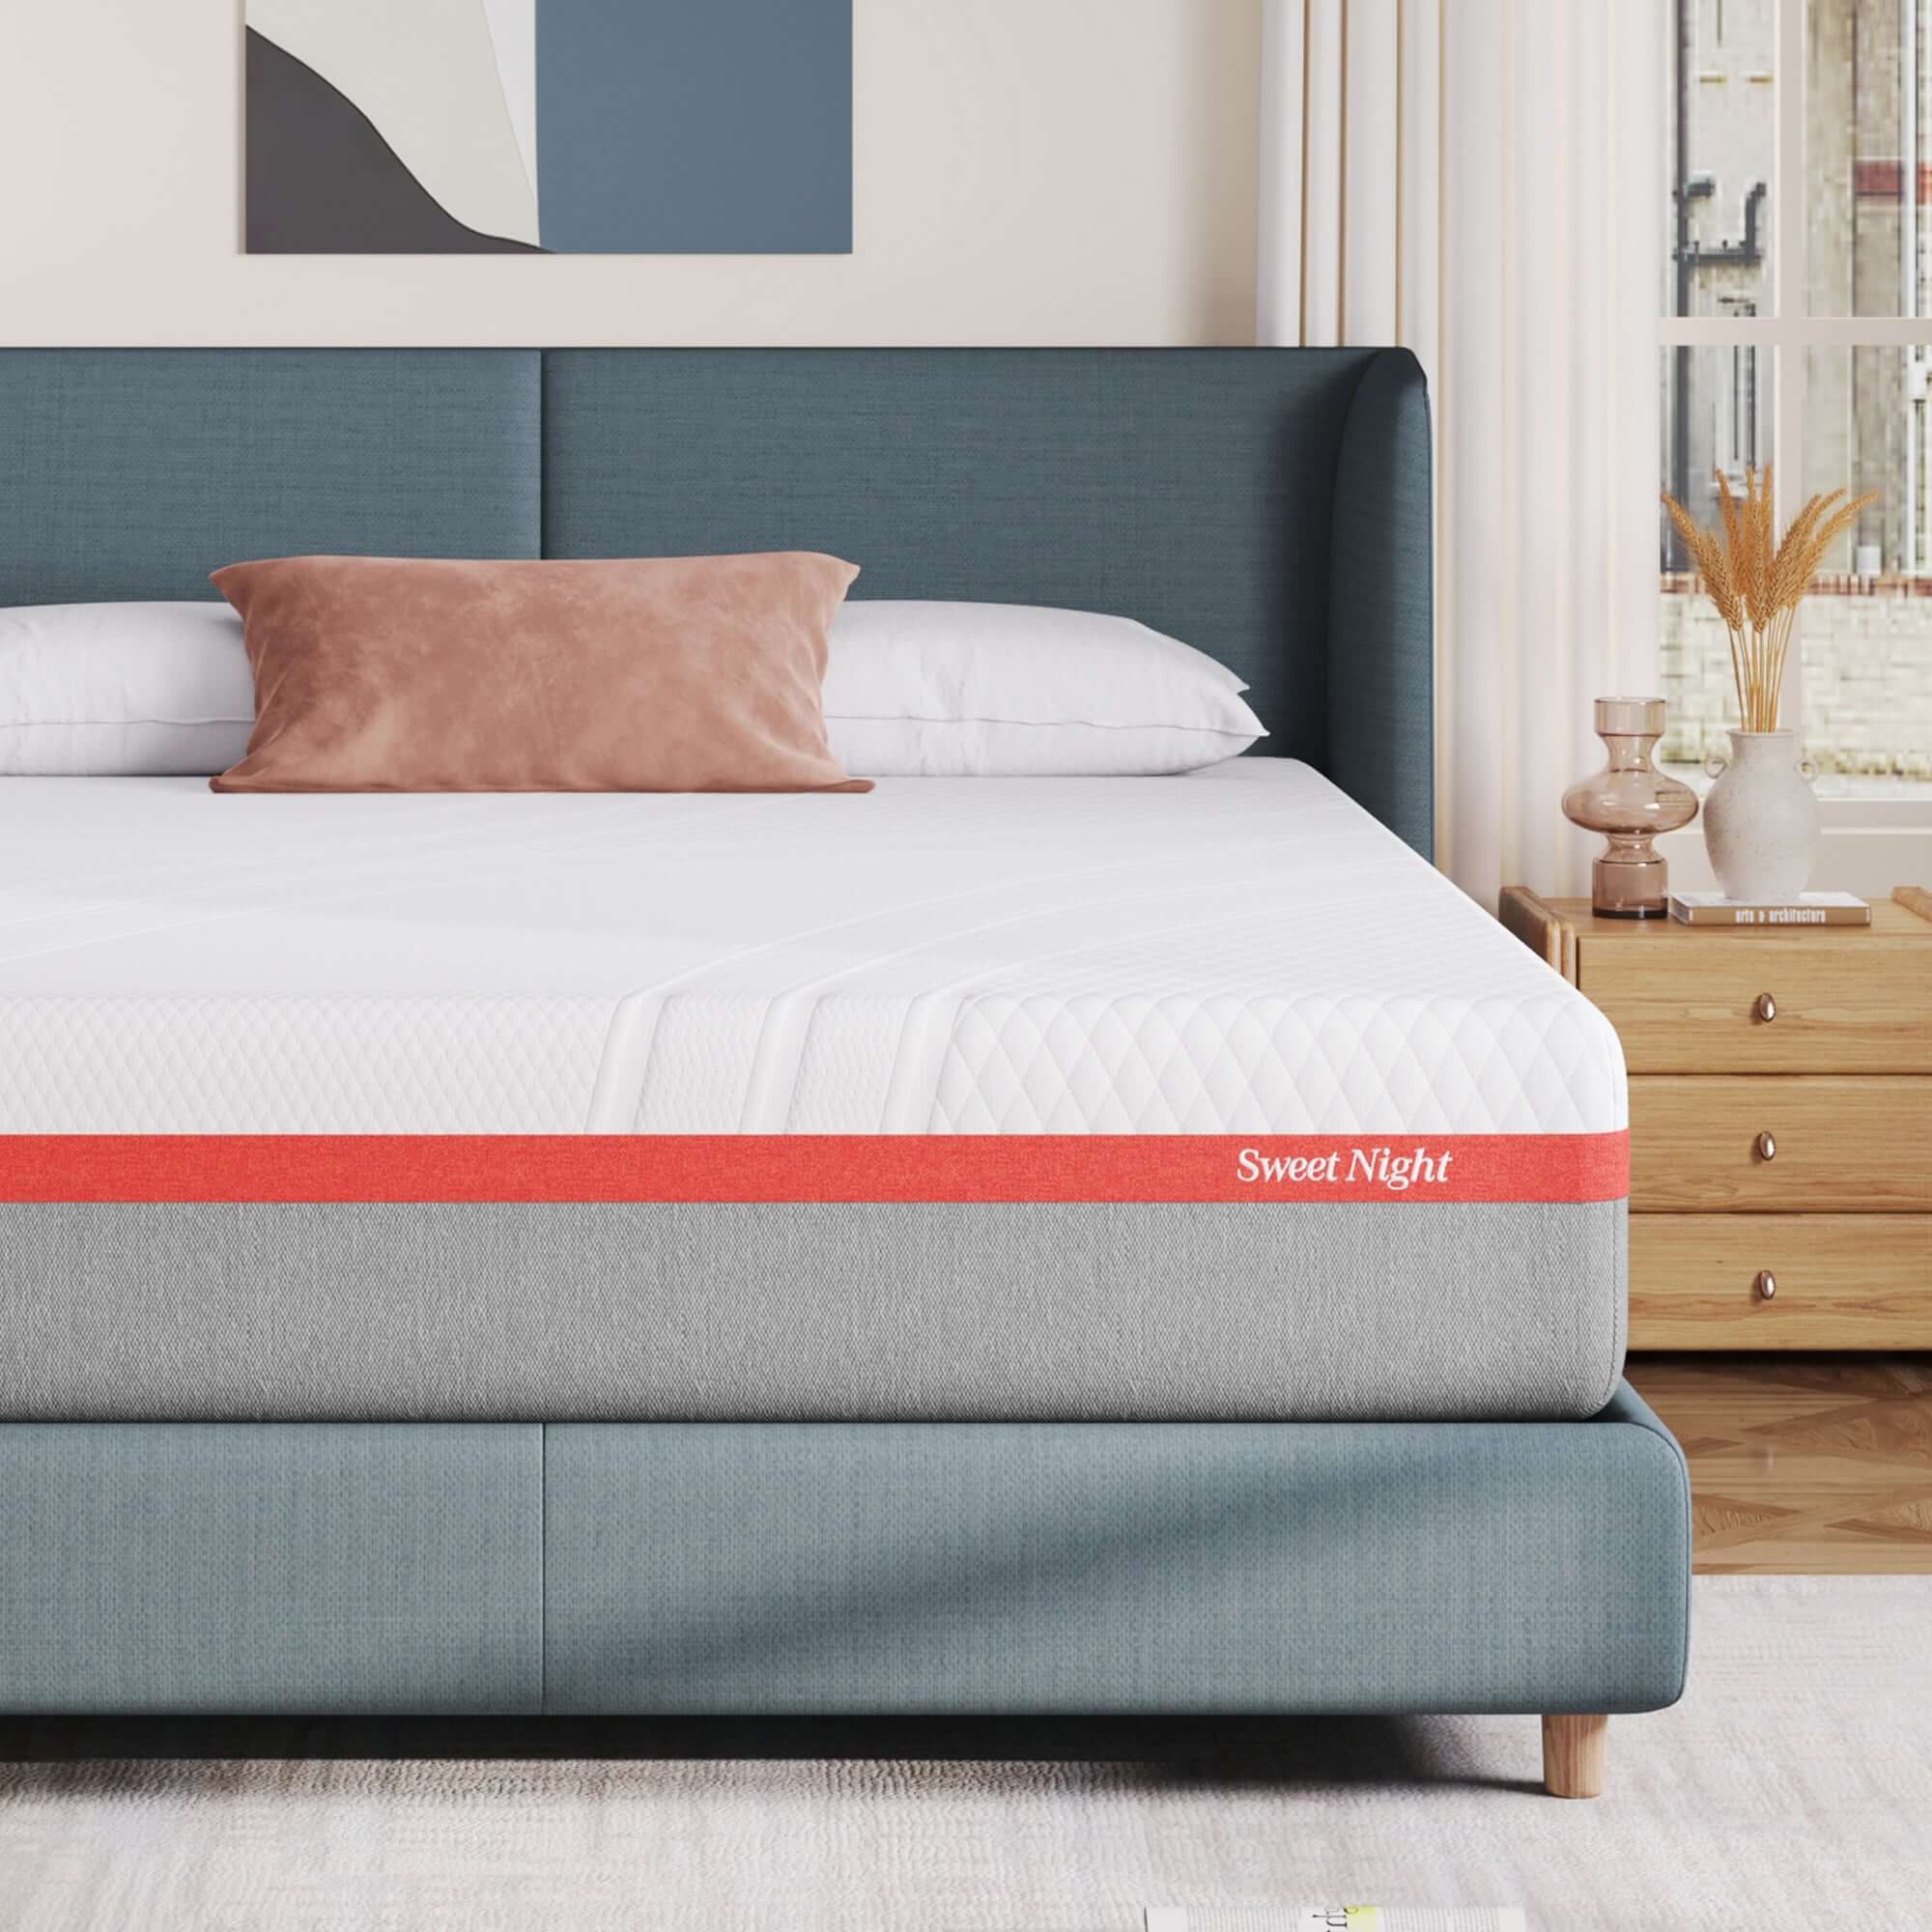 Sweetnight 10 in. Medium to Firm Innerspring Mattress, Support and Breathable Gel Memory Foam Pillow Top Queen Size Mattress, Multi-Colored